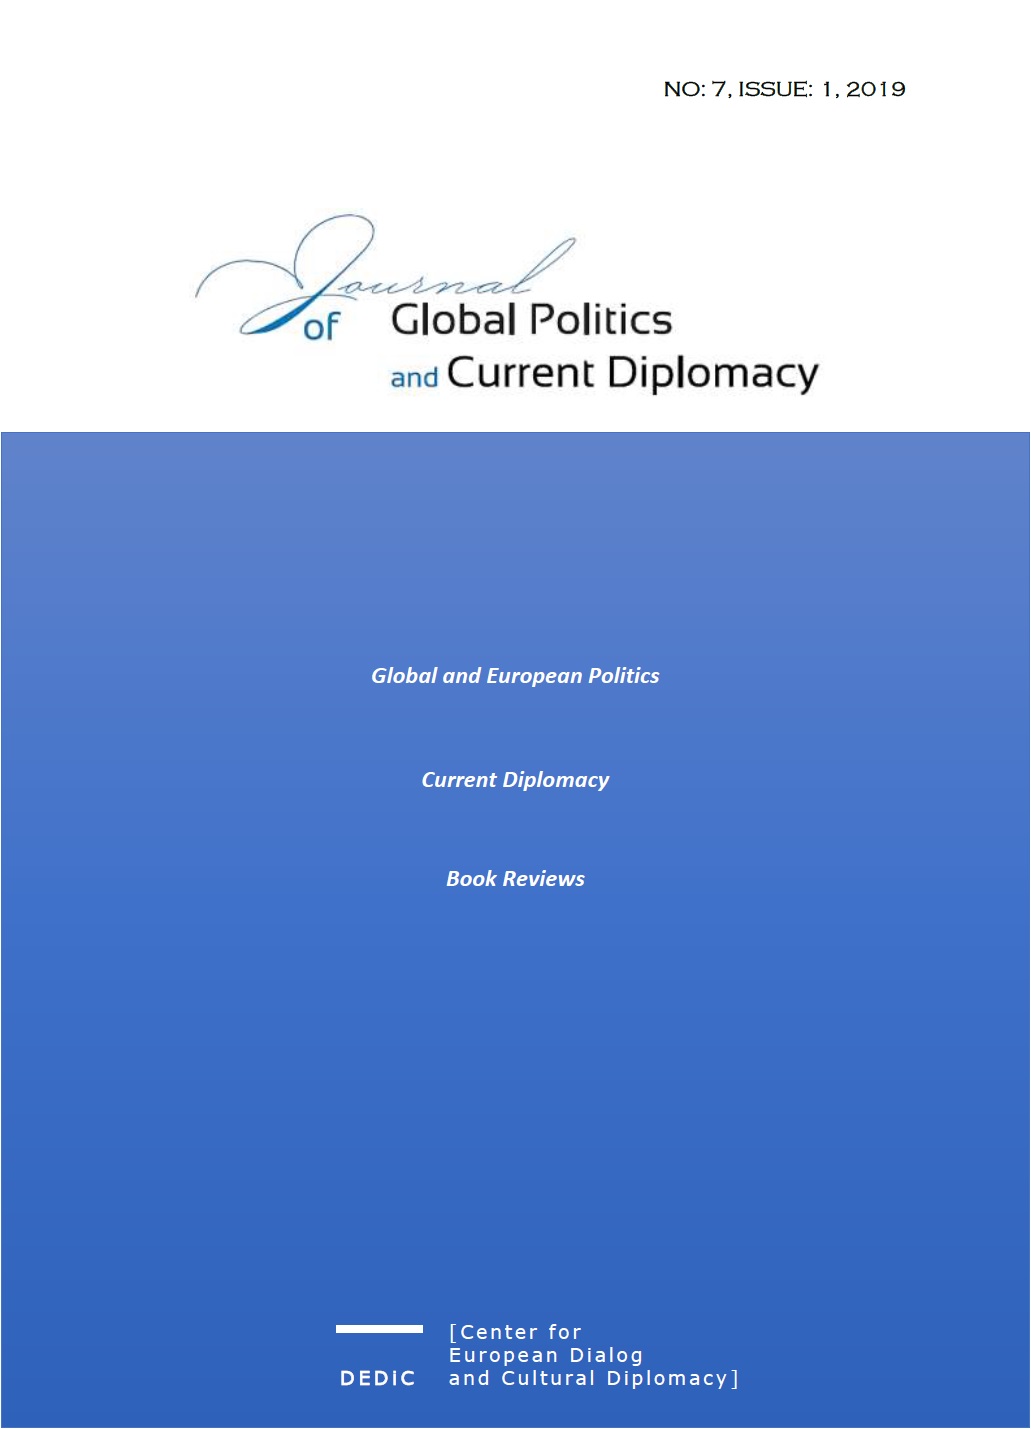 Book Review: Nicolas Badalassi and Sarah B. Snyder (edited by), The CSCE and the End of the Cold War. Diplomacy, Societies and Human Rights. 1972-1990. New York, Oxford: Berghahn, 2019. Cover Image